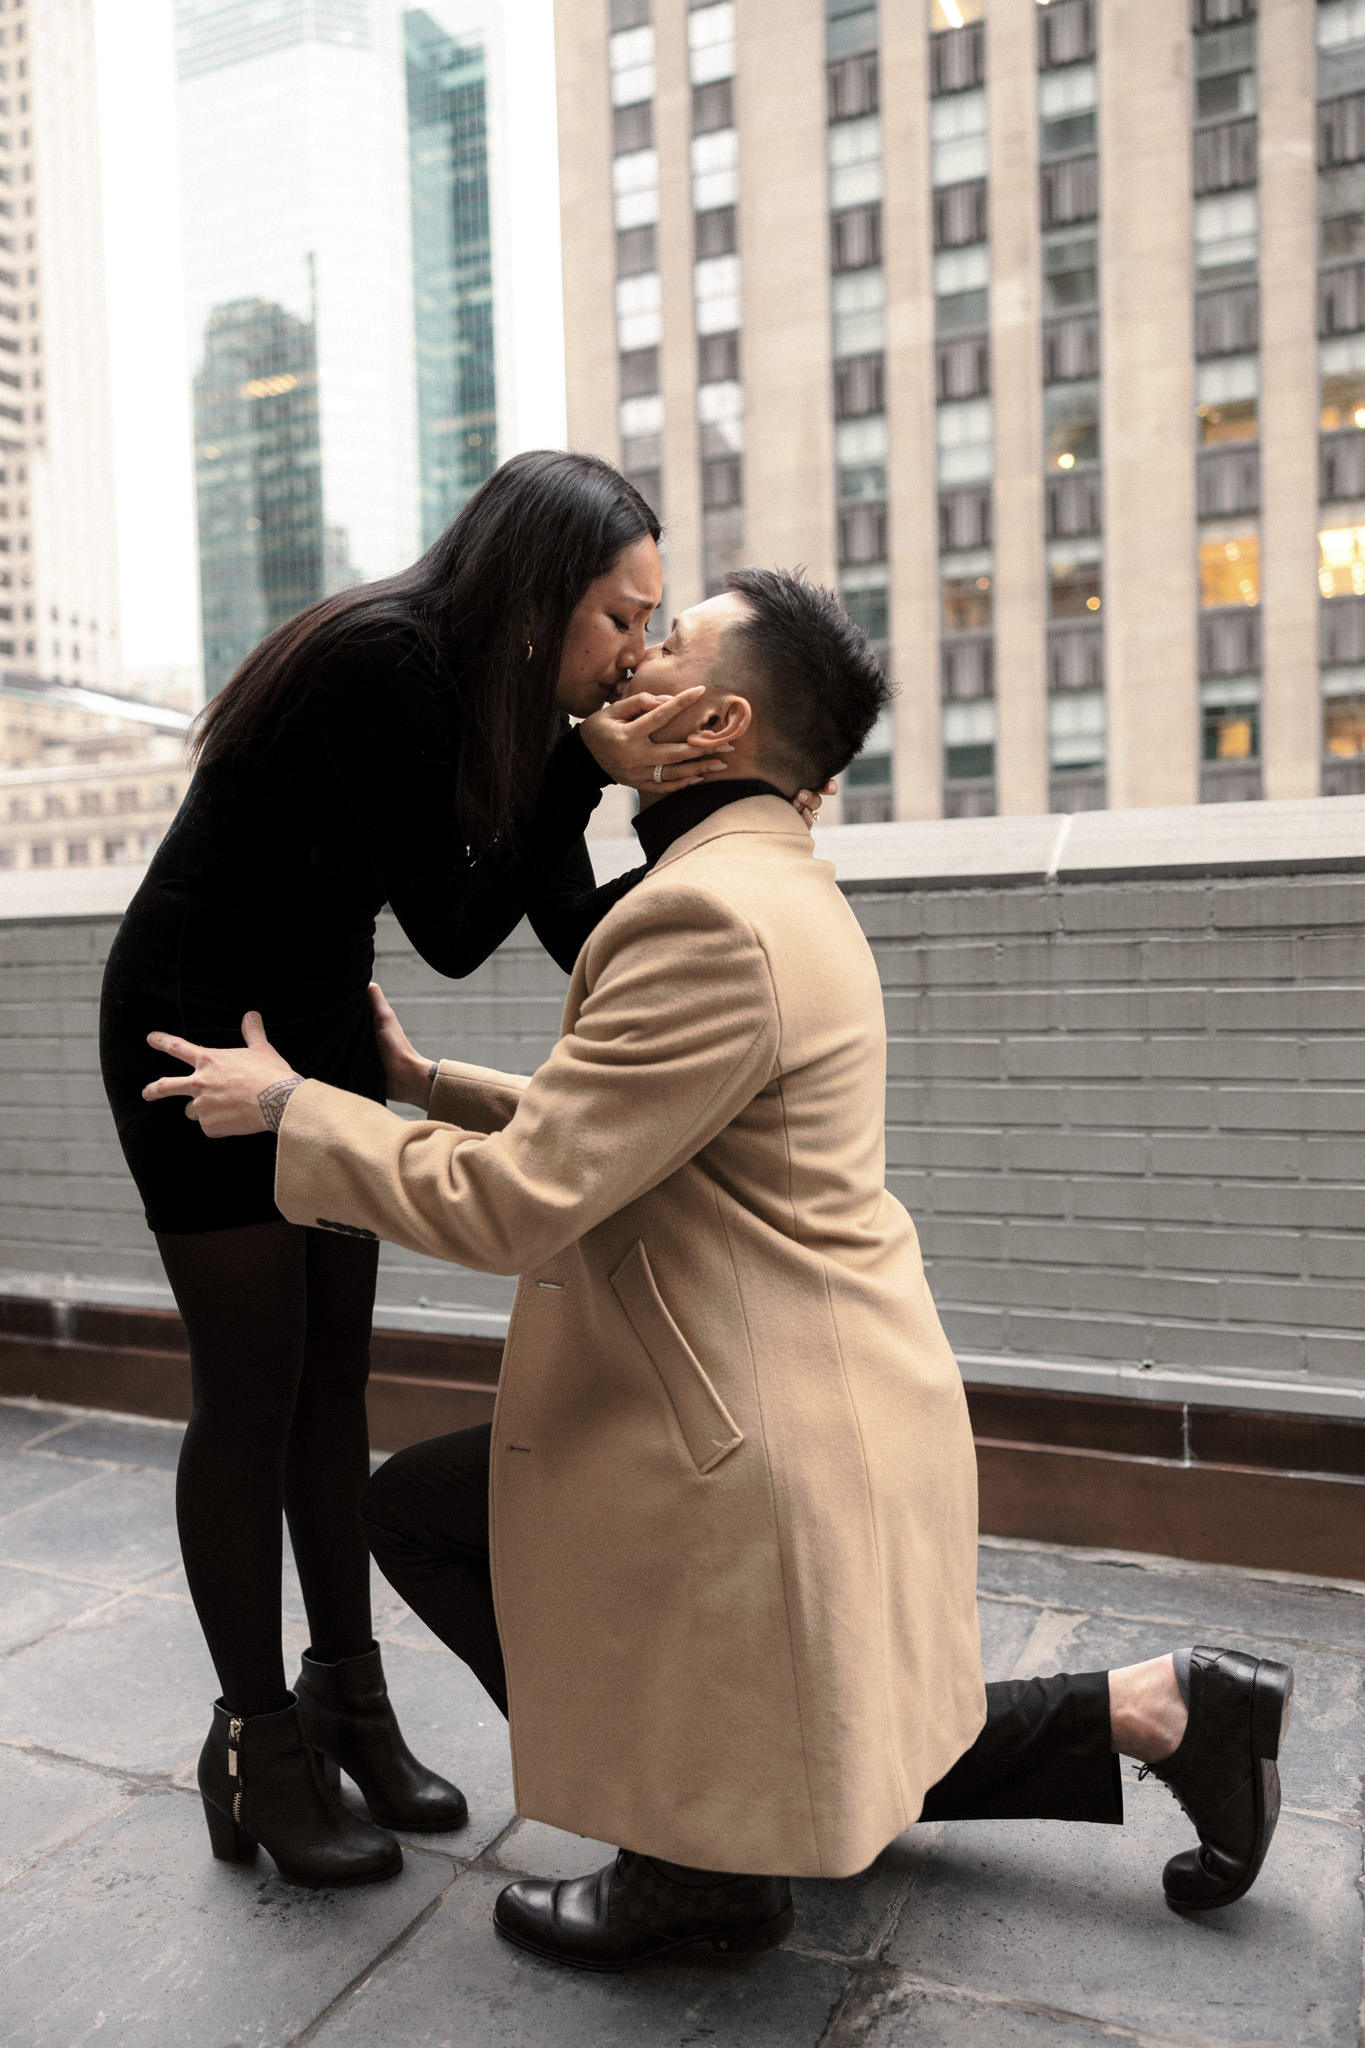 The woman is emotionally kissing her fiancé after she said yes. Proposal in NYC image by Jenny Fu Studio